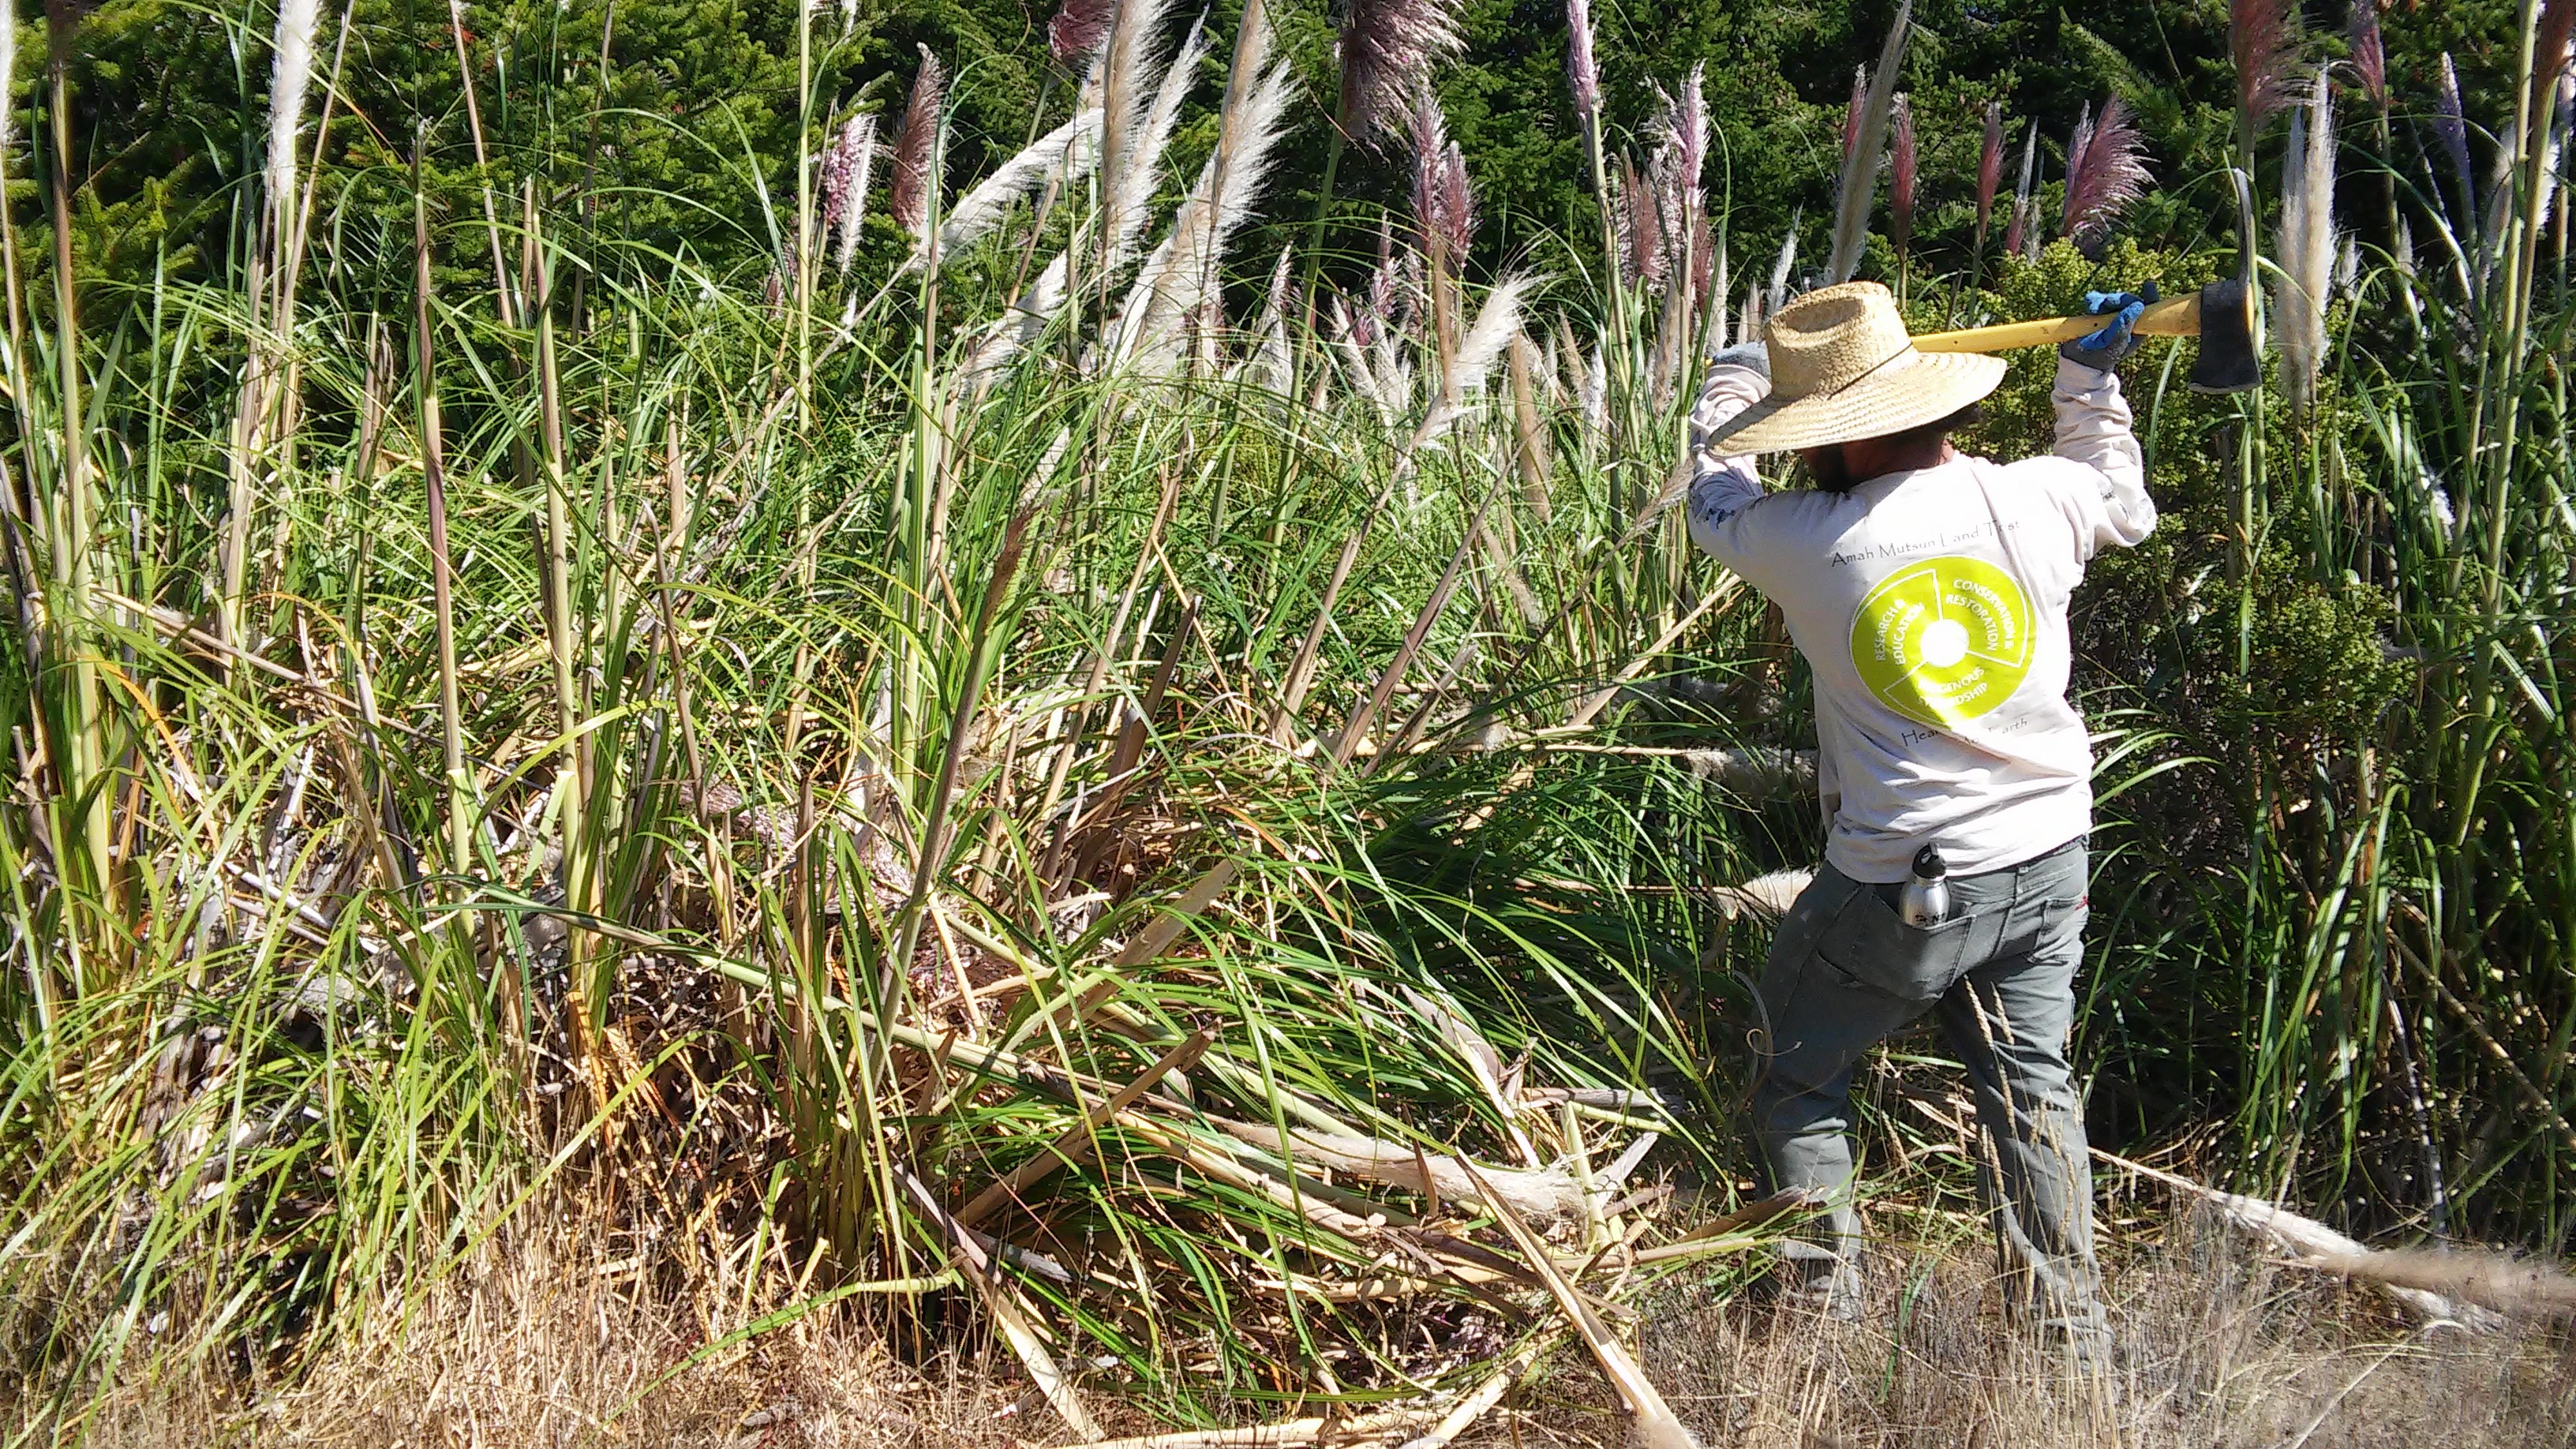 Native Steward Paul Lopez begins removal of a stand of Pampas grass (Cortaderia jubata) in the Costanoa Easement. The AMLT has been controlling the spread of the invasive Pampas grass at the Costanoa Easement for nearly two years, preventing the spread of the invasive grass into nearby Quiroste Valley Cultural Preserve. In 2015, Native Stewards spent two weeks removing  over 600 mature Pampas grass individuals. In the same 40-acre area, this year they removed over 350 individuals--many resprouts of former mature plants--in the course of only three days, demonstrating the efficacy of our previous restoration efforts.